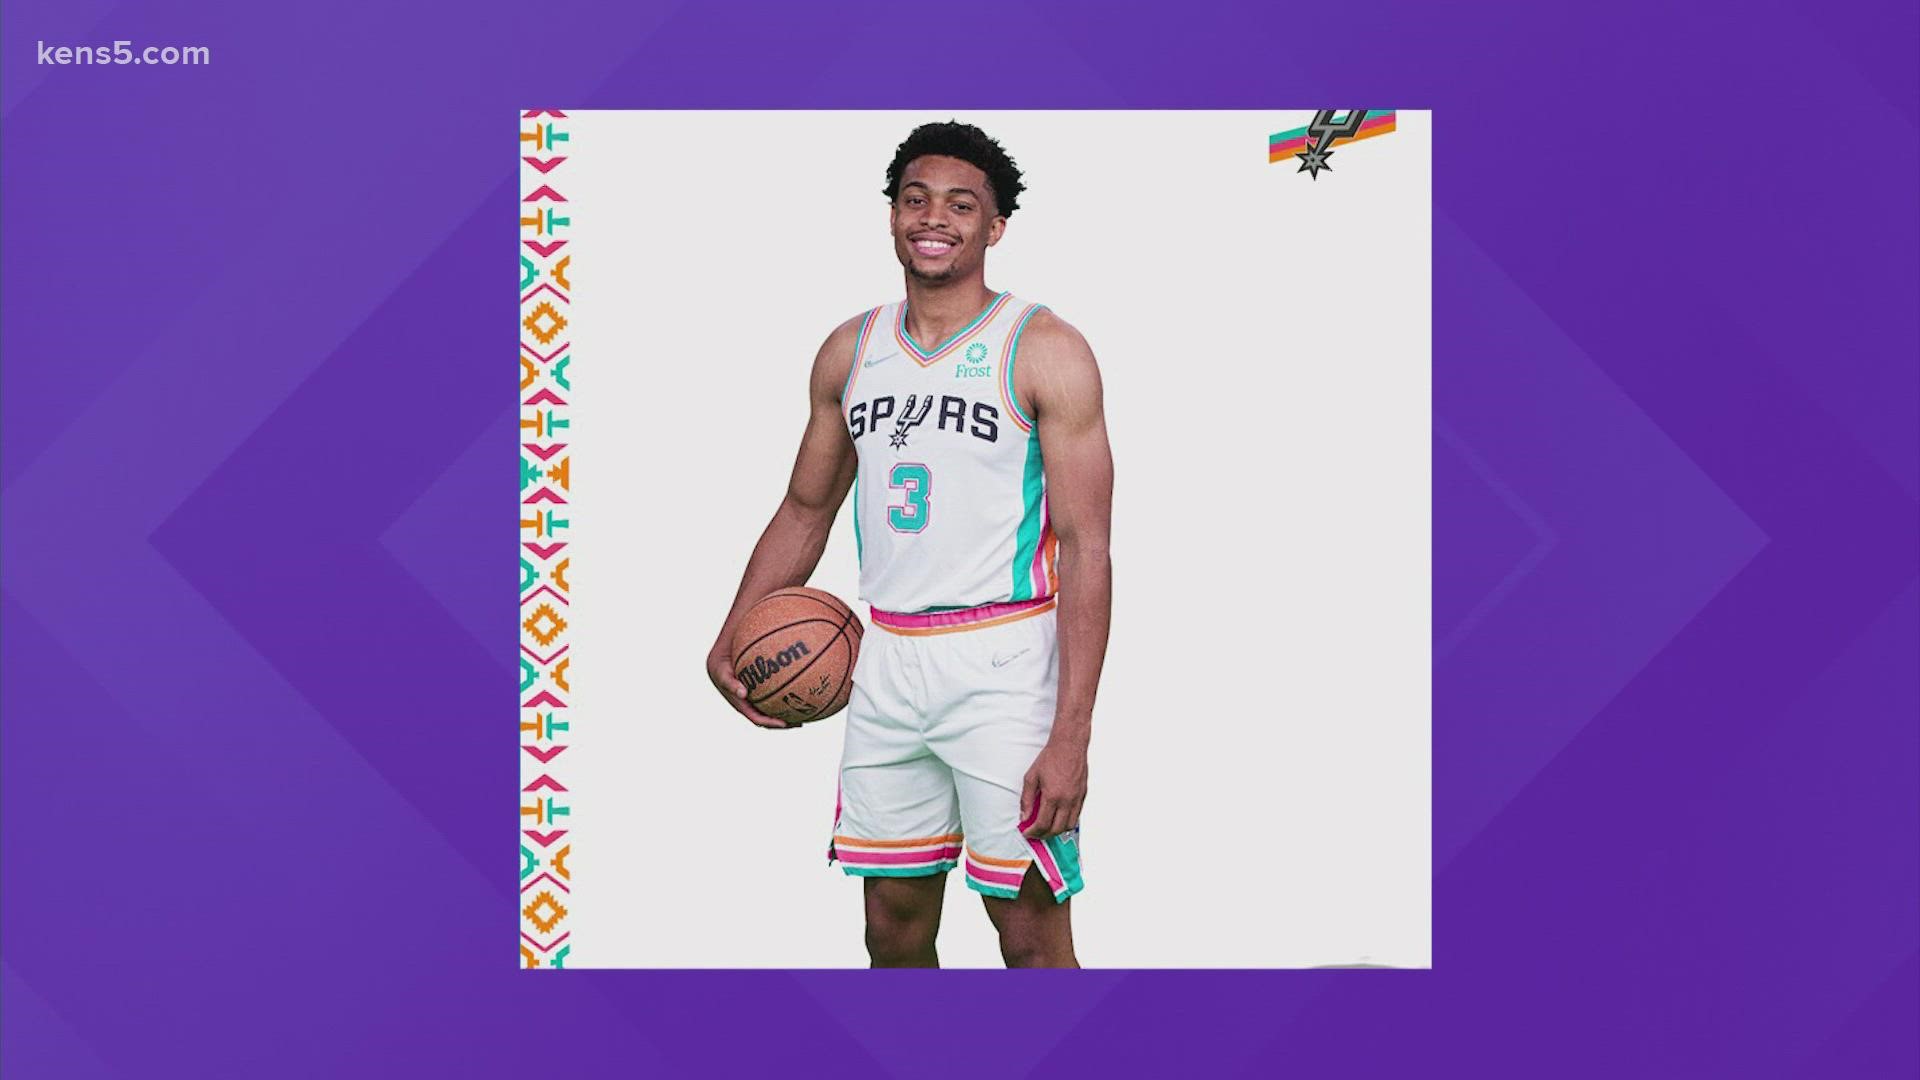 The NBA and the Spurs released the new-look uniforms as part of the league's celebration of the NBA’s 75th anniversary.